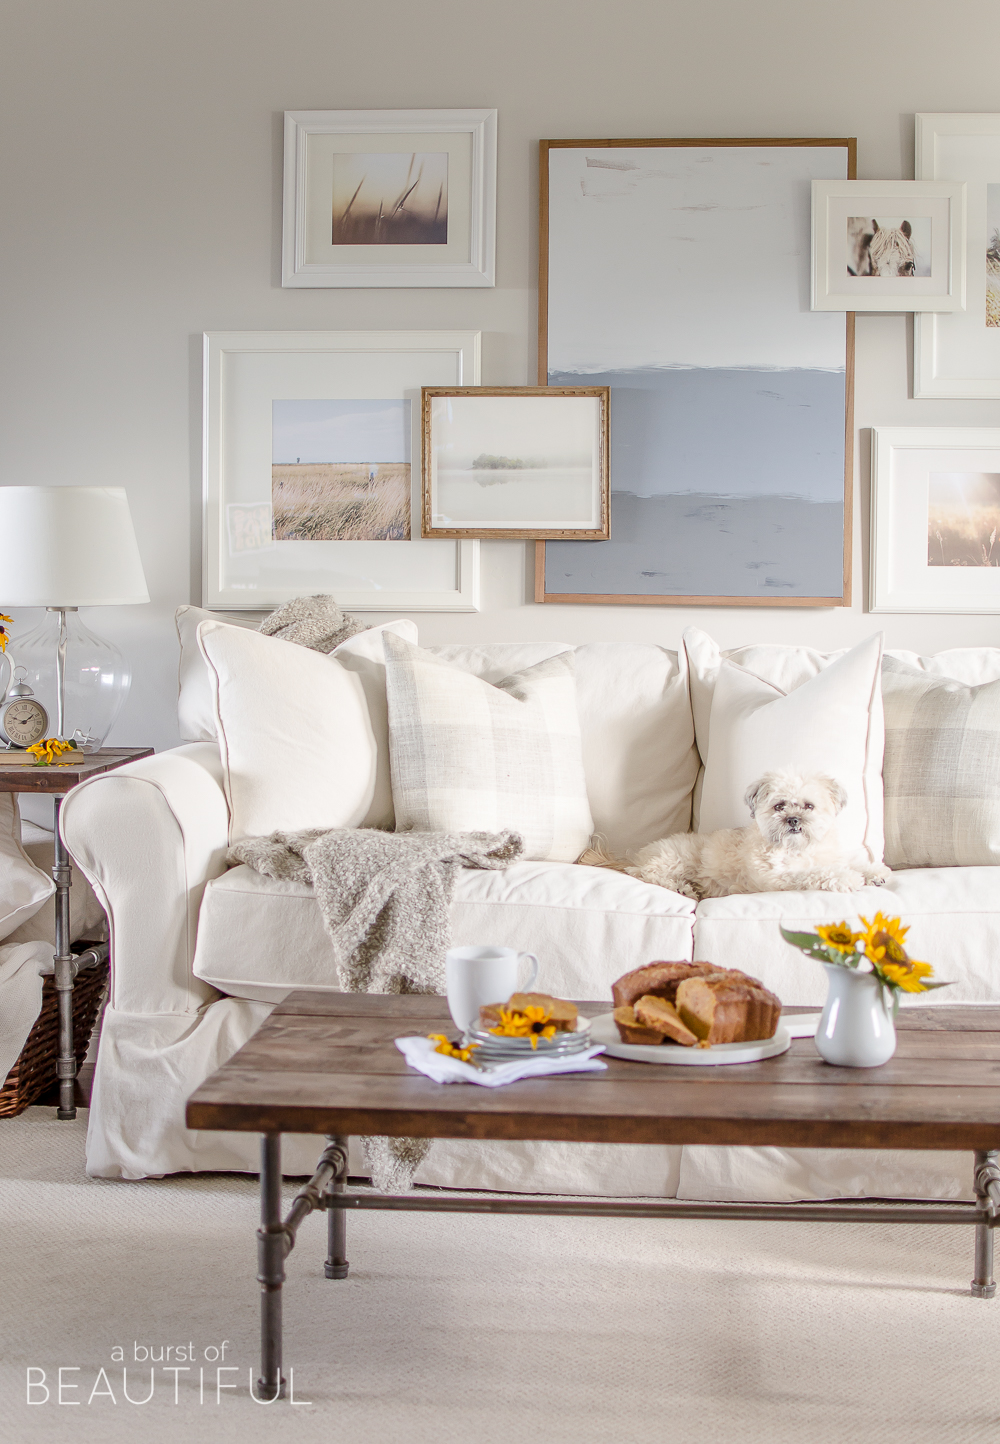 This beautiful modern farmhouse embraces fall with subtle hints of the season